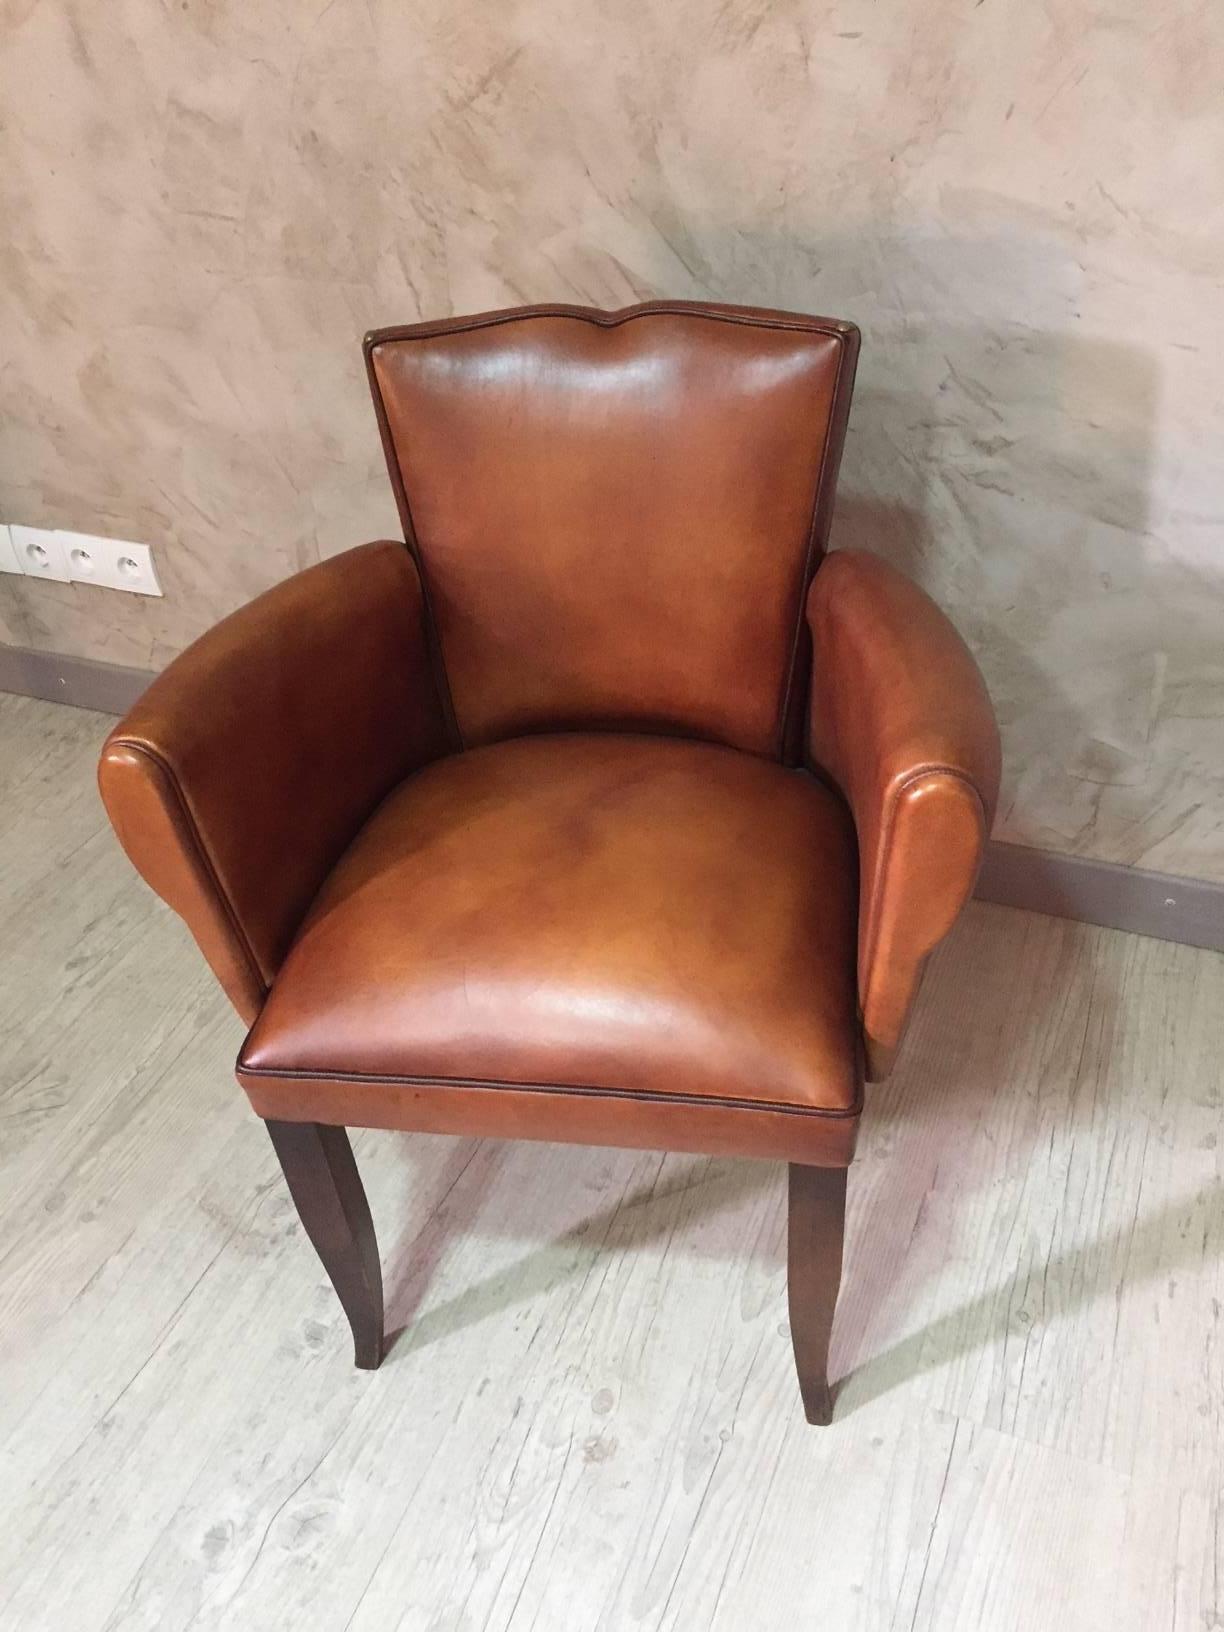 Moustache bridge armchair fully restored with a good quality patinated leather and braid finish. This armchair would be ideal for an office. It called 